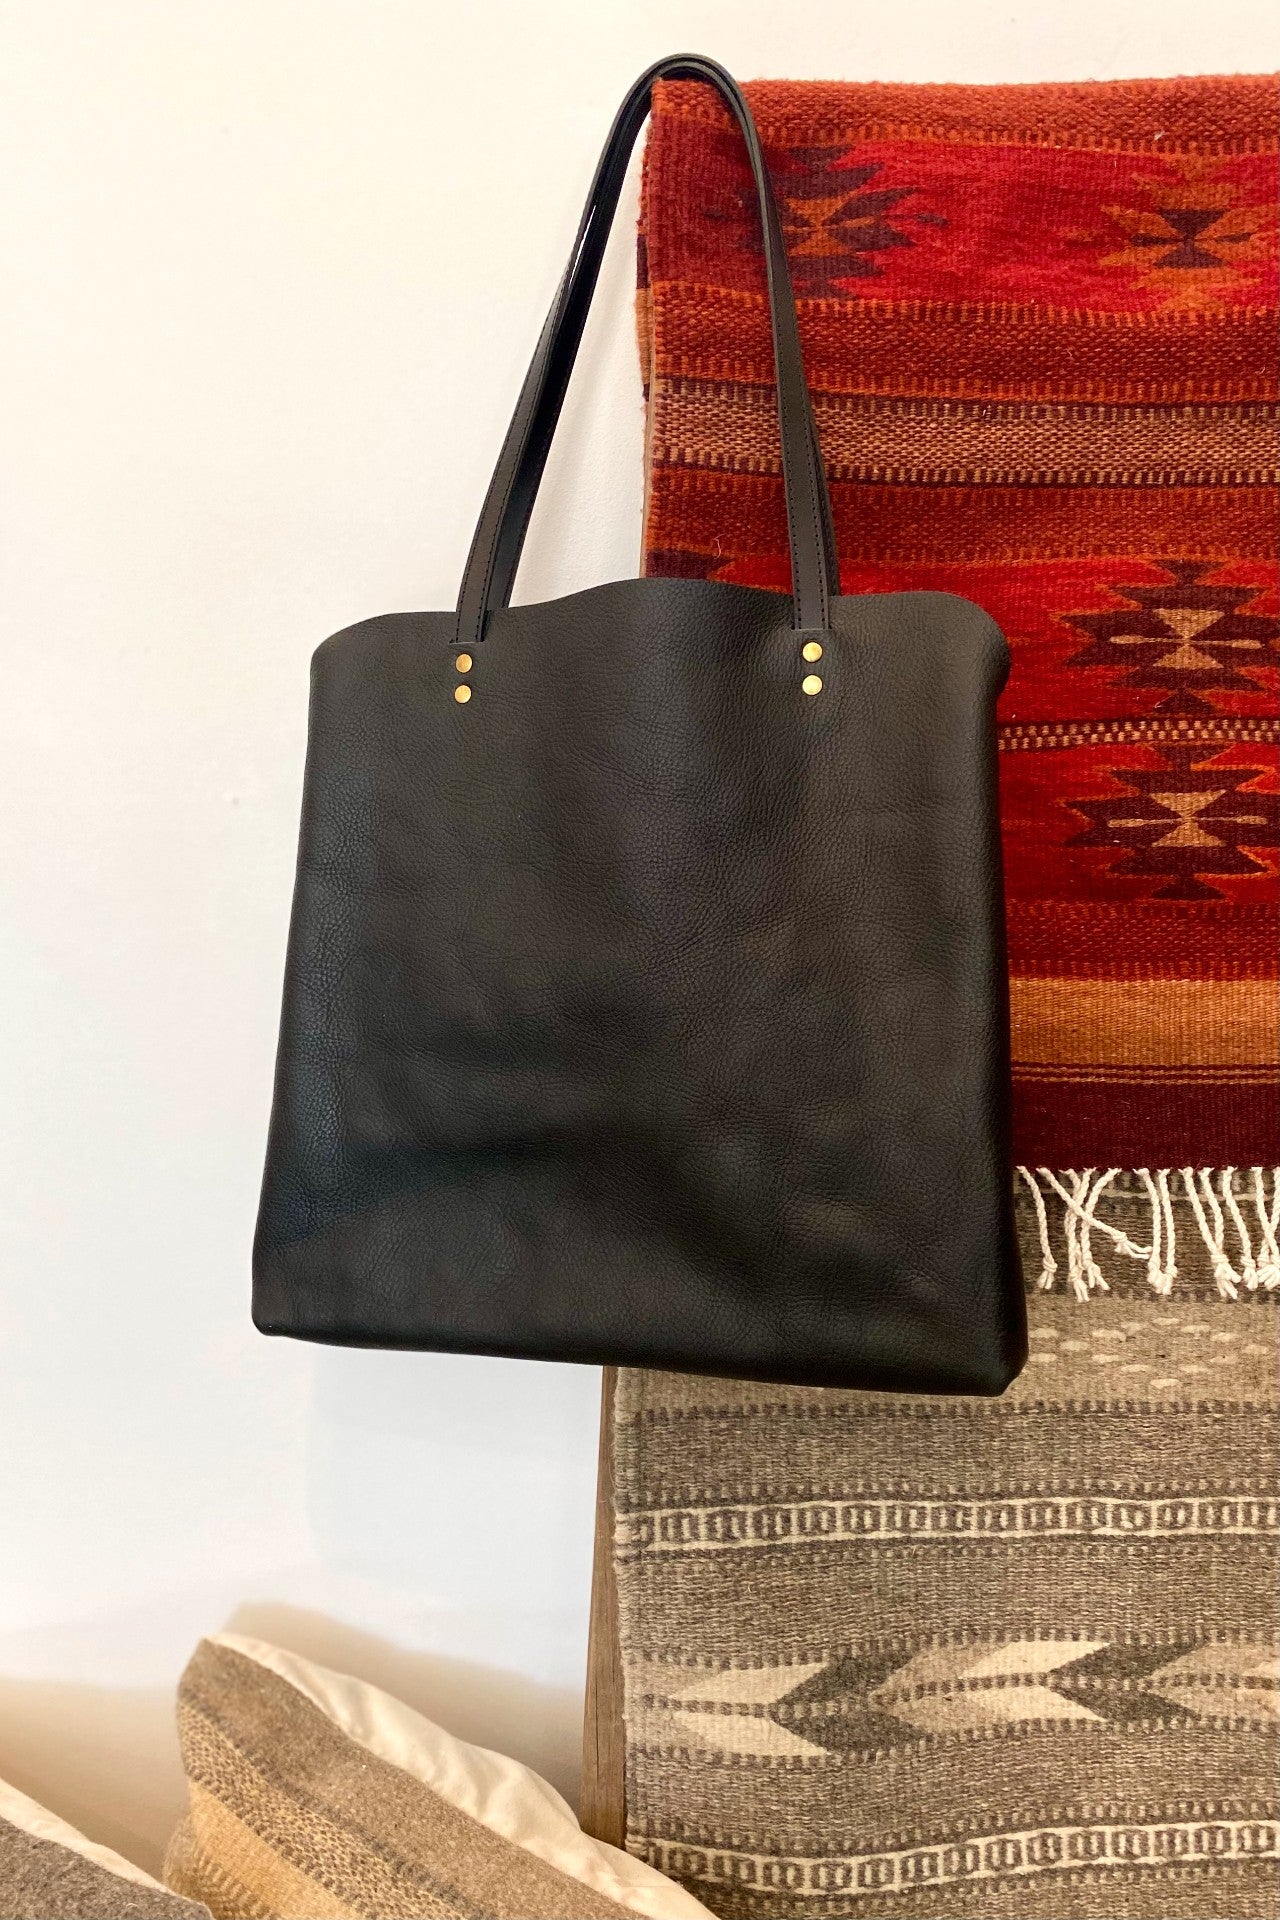 WEATHER & STORY - Large Everyday Leather Tote Shoulde Bag - Black Pebbled Leather - Handmade in Austin, Texas, USA